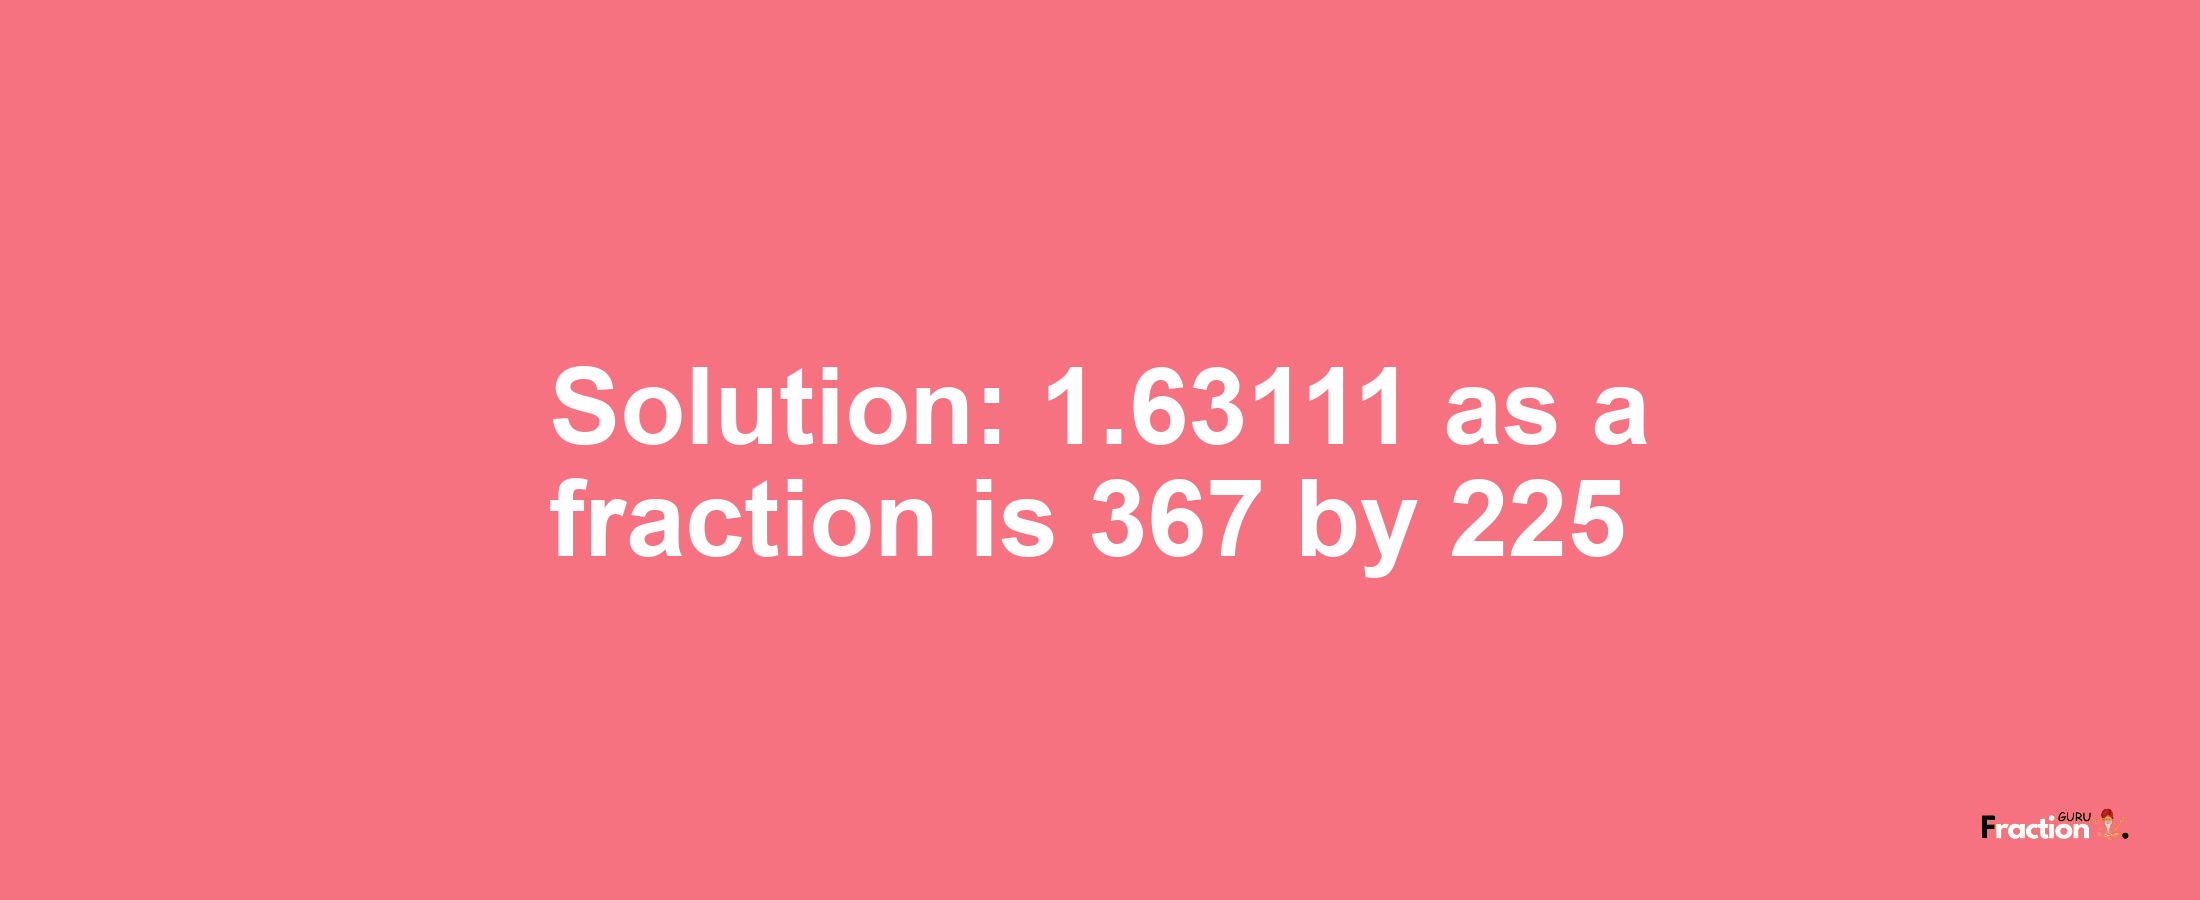 Solution:1.63111 as a fraction is 367/225